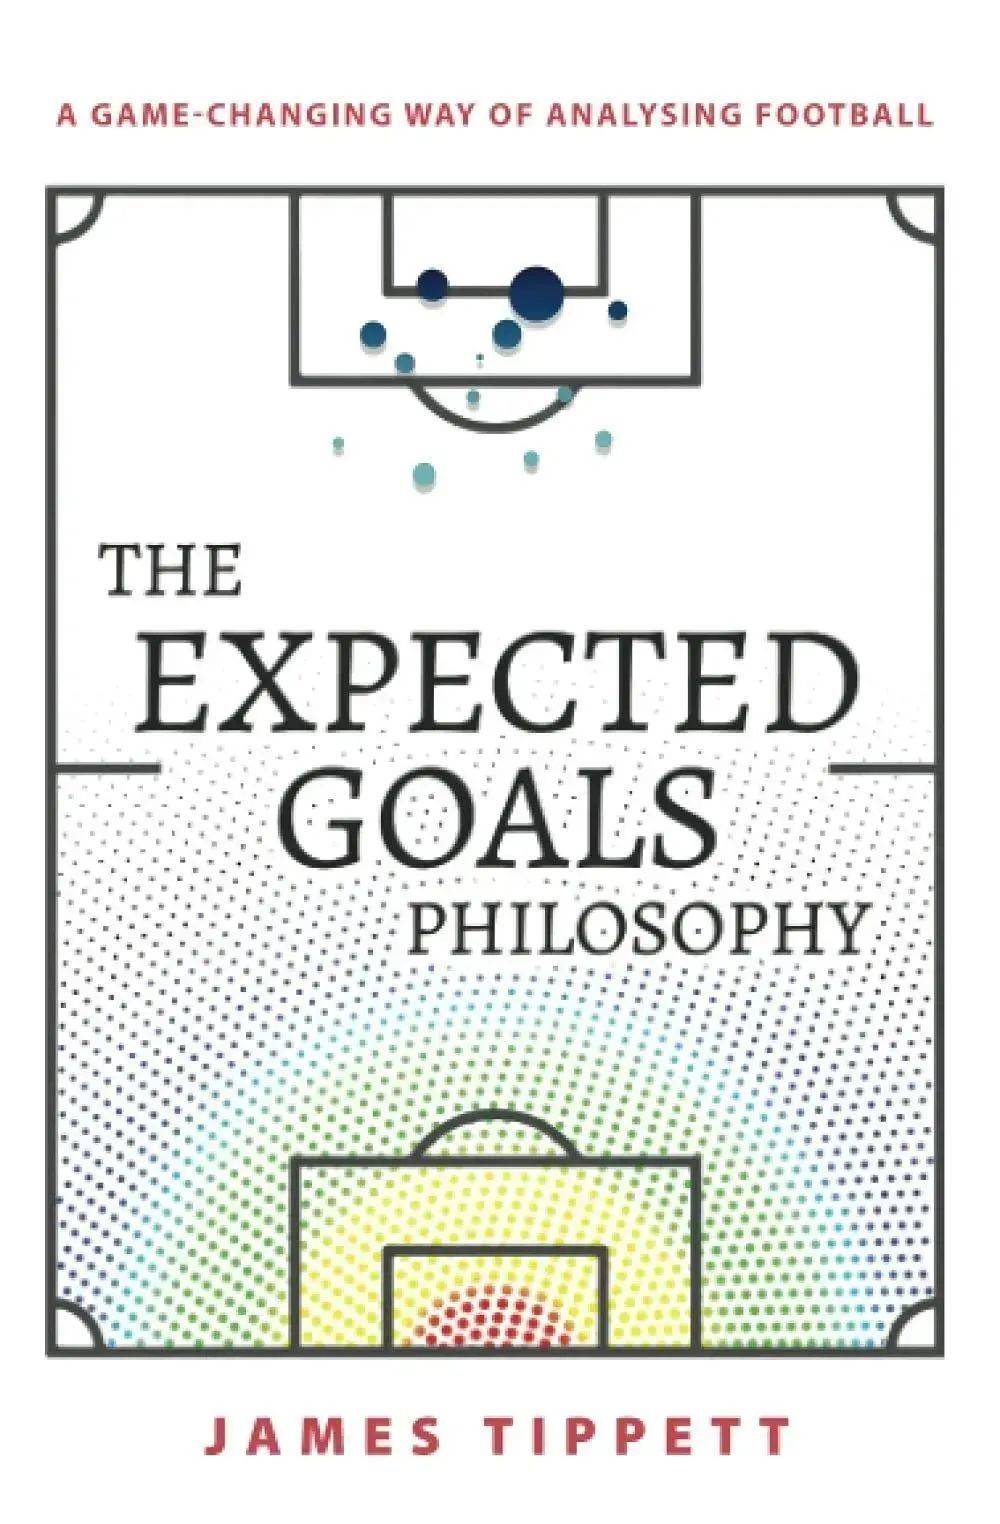 《Expected Goals》（预期进球）<br>